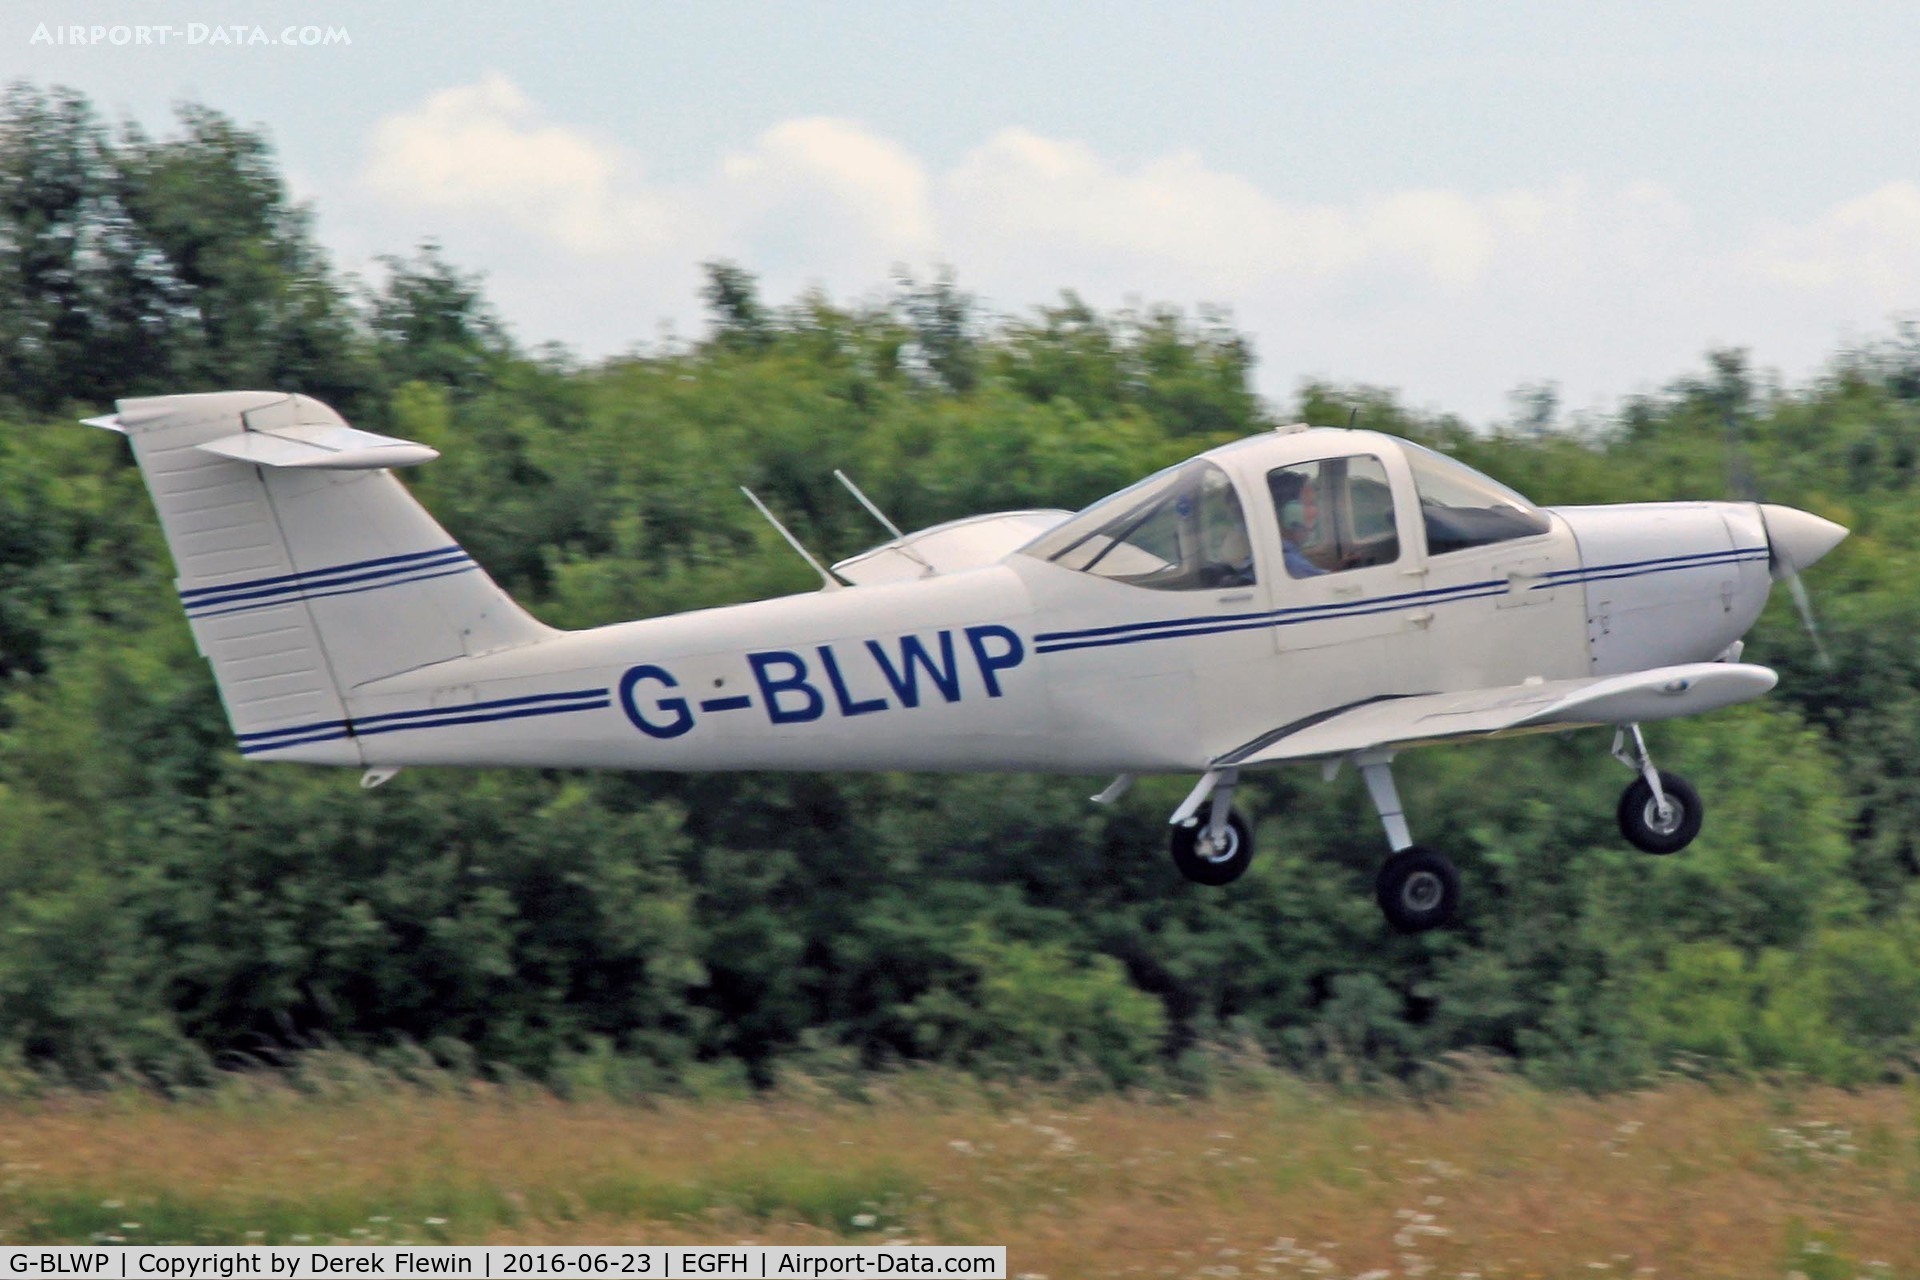 G-BLWP, 1978 Piper PA-38-112 Tomahawk Tomahawk C/N 38-78A0367, Tomahawk, Cambrian Flying Club Swansea based, previously OY-BTW, seen departing runway 28, for circuit training.